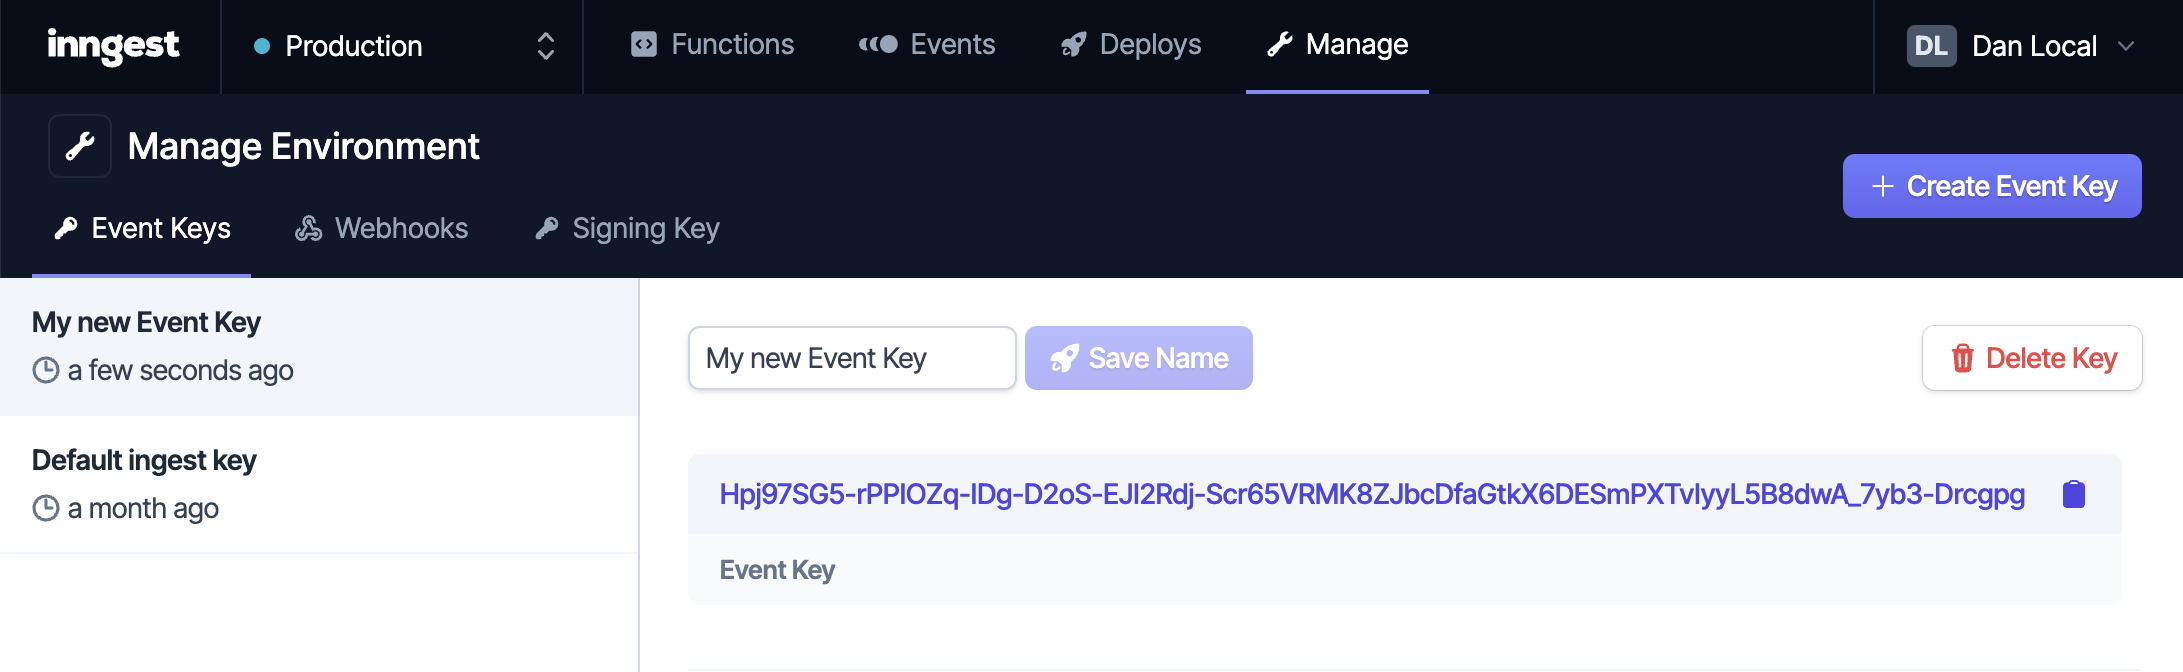 A newly created Event Key in the Inngest Cloud dashboard